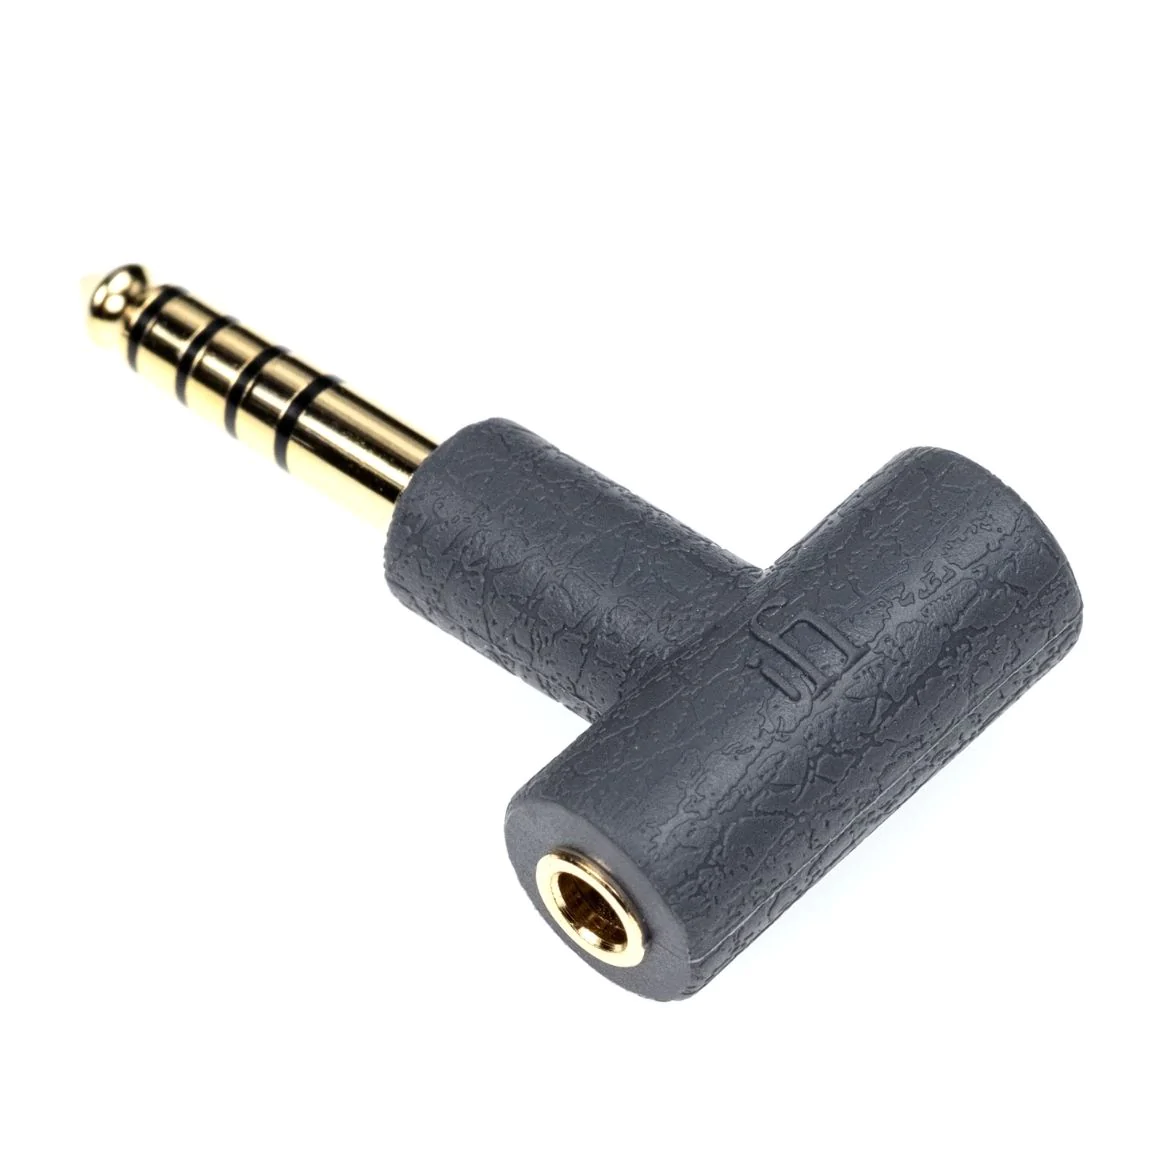 iFi Audio 3.5mm to 4.4mm